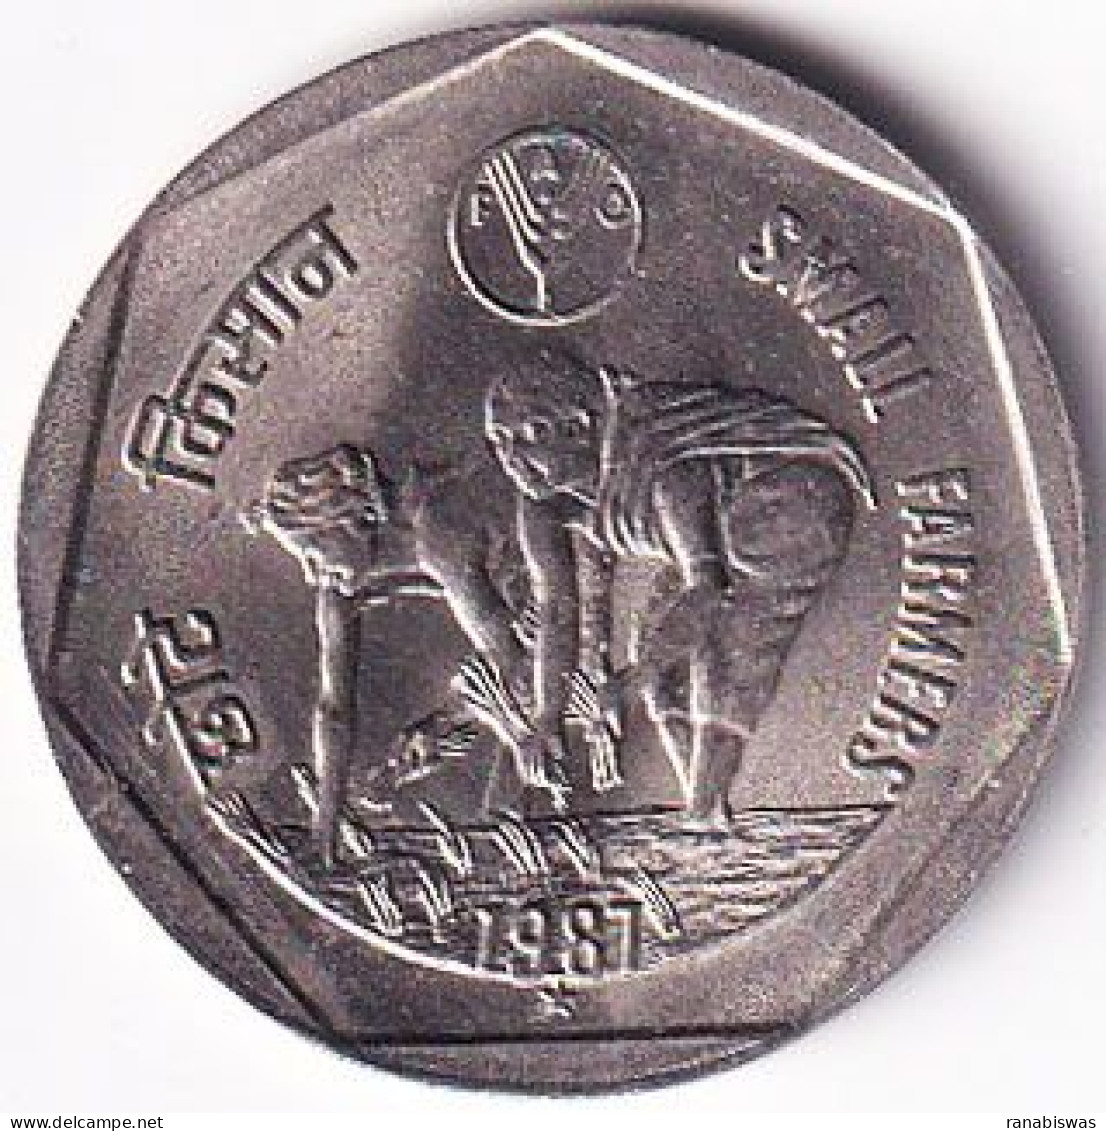 INDIA COIN LOT 32, 1 RUPEE 1987, SMALL FARMERS, FAO, HYDERABAD MINT, UNC, SCARE - Inde